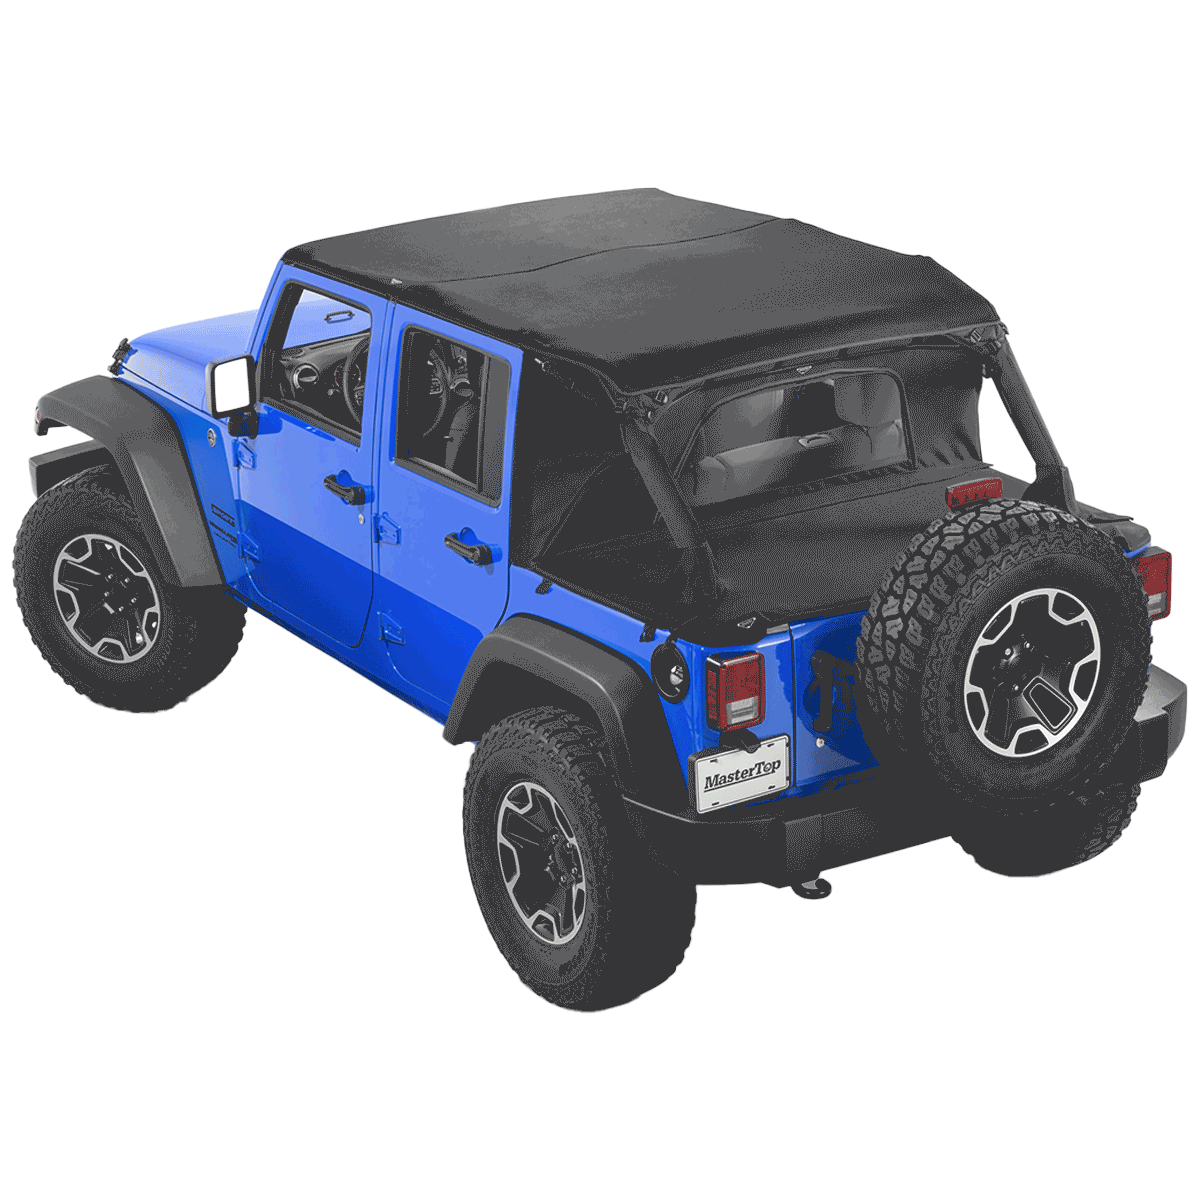 Jeep Wrangler Accessories  Twin Lakes Chrysler Dodge Jeep RAM